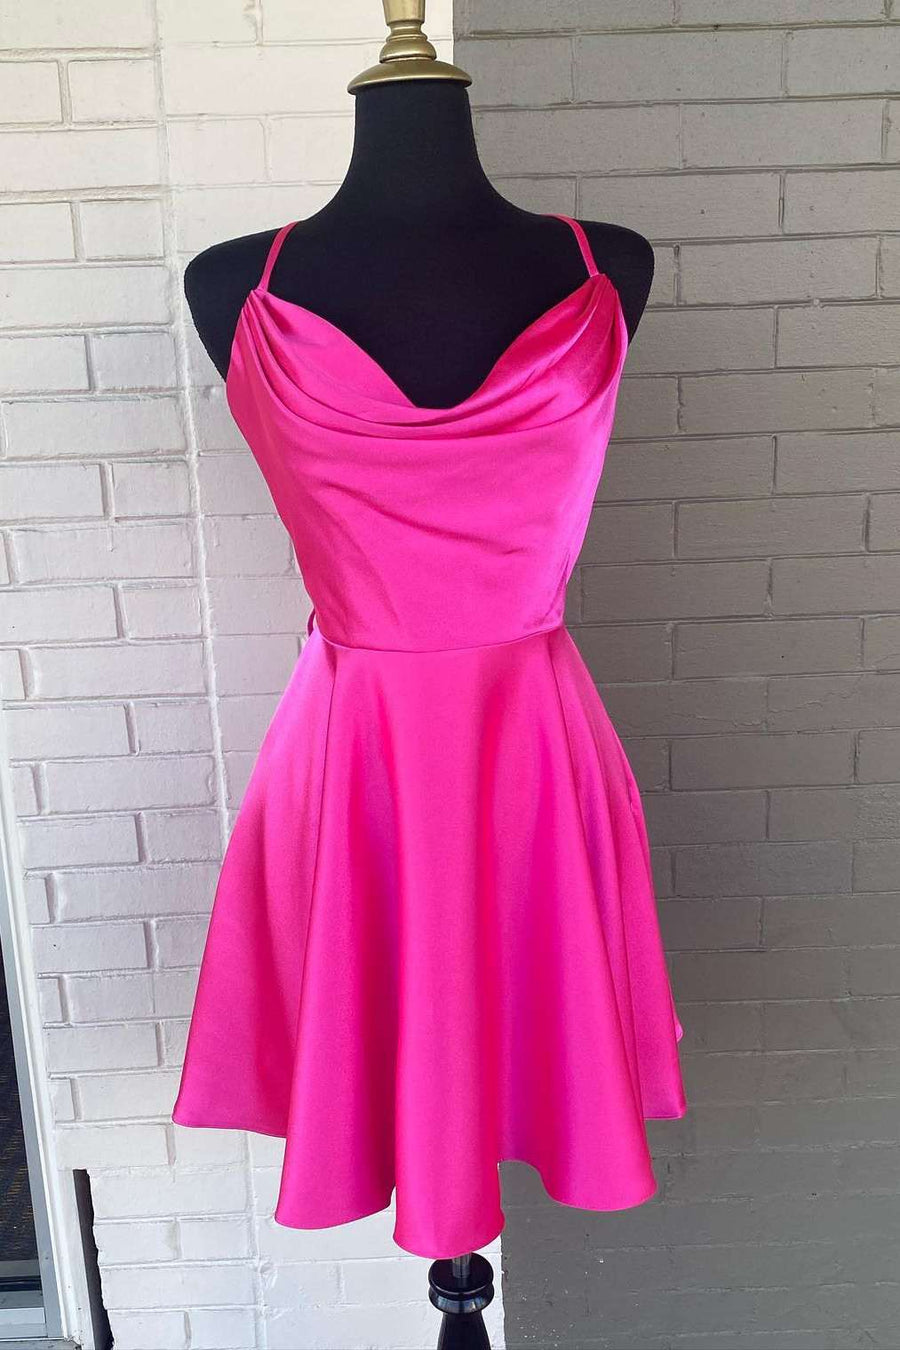 Neon Pink Cowl Neck Lace-Up A-Line Homecoming Dress